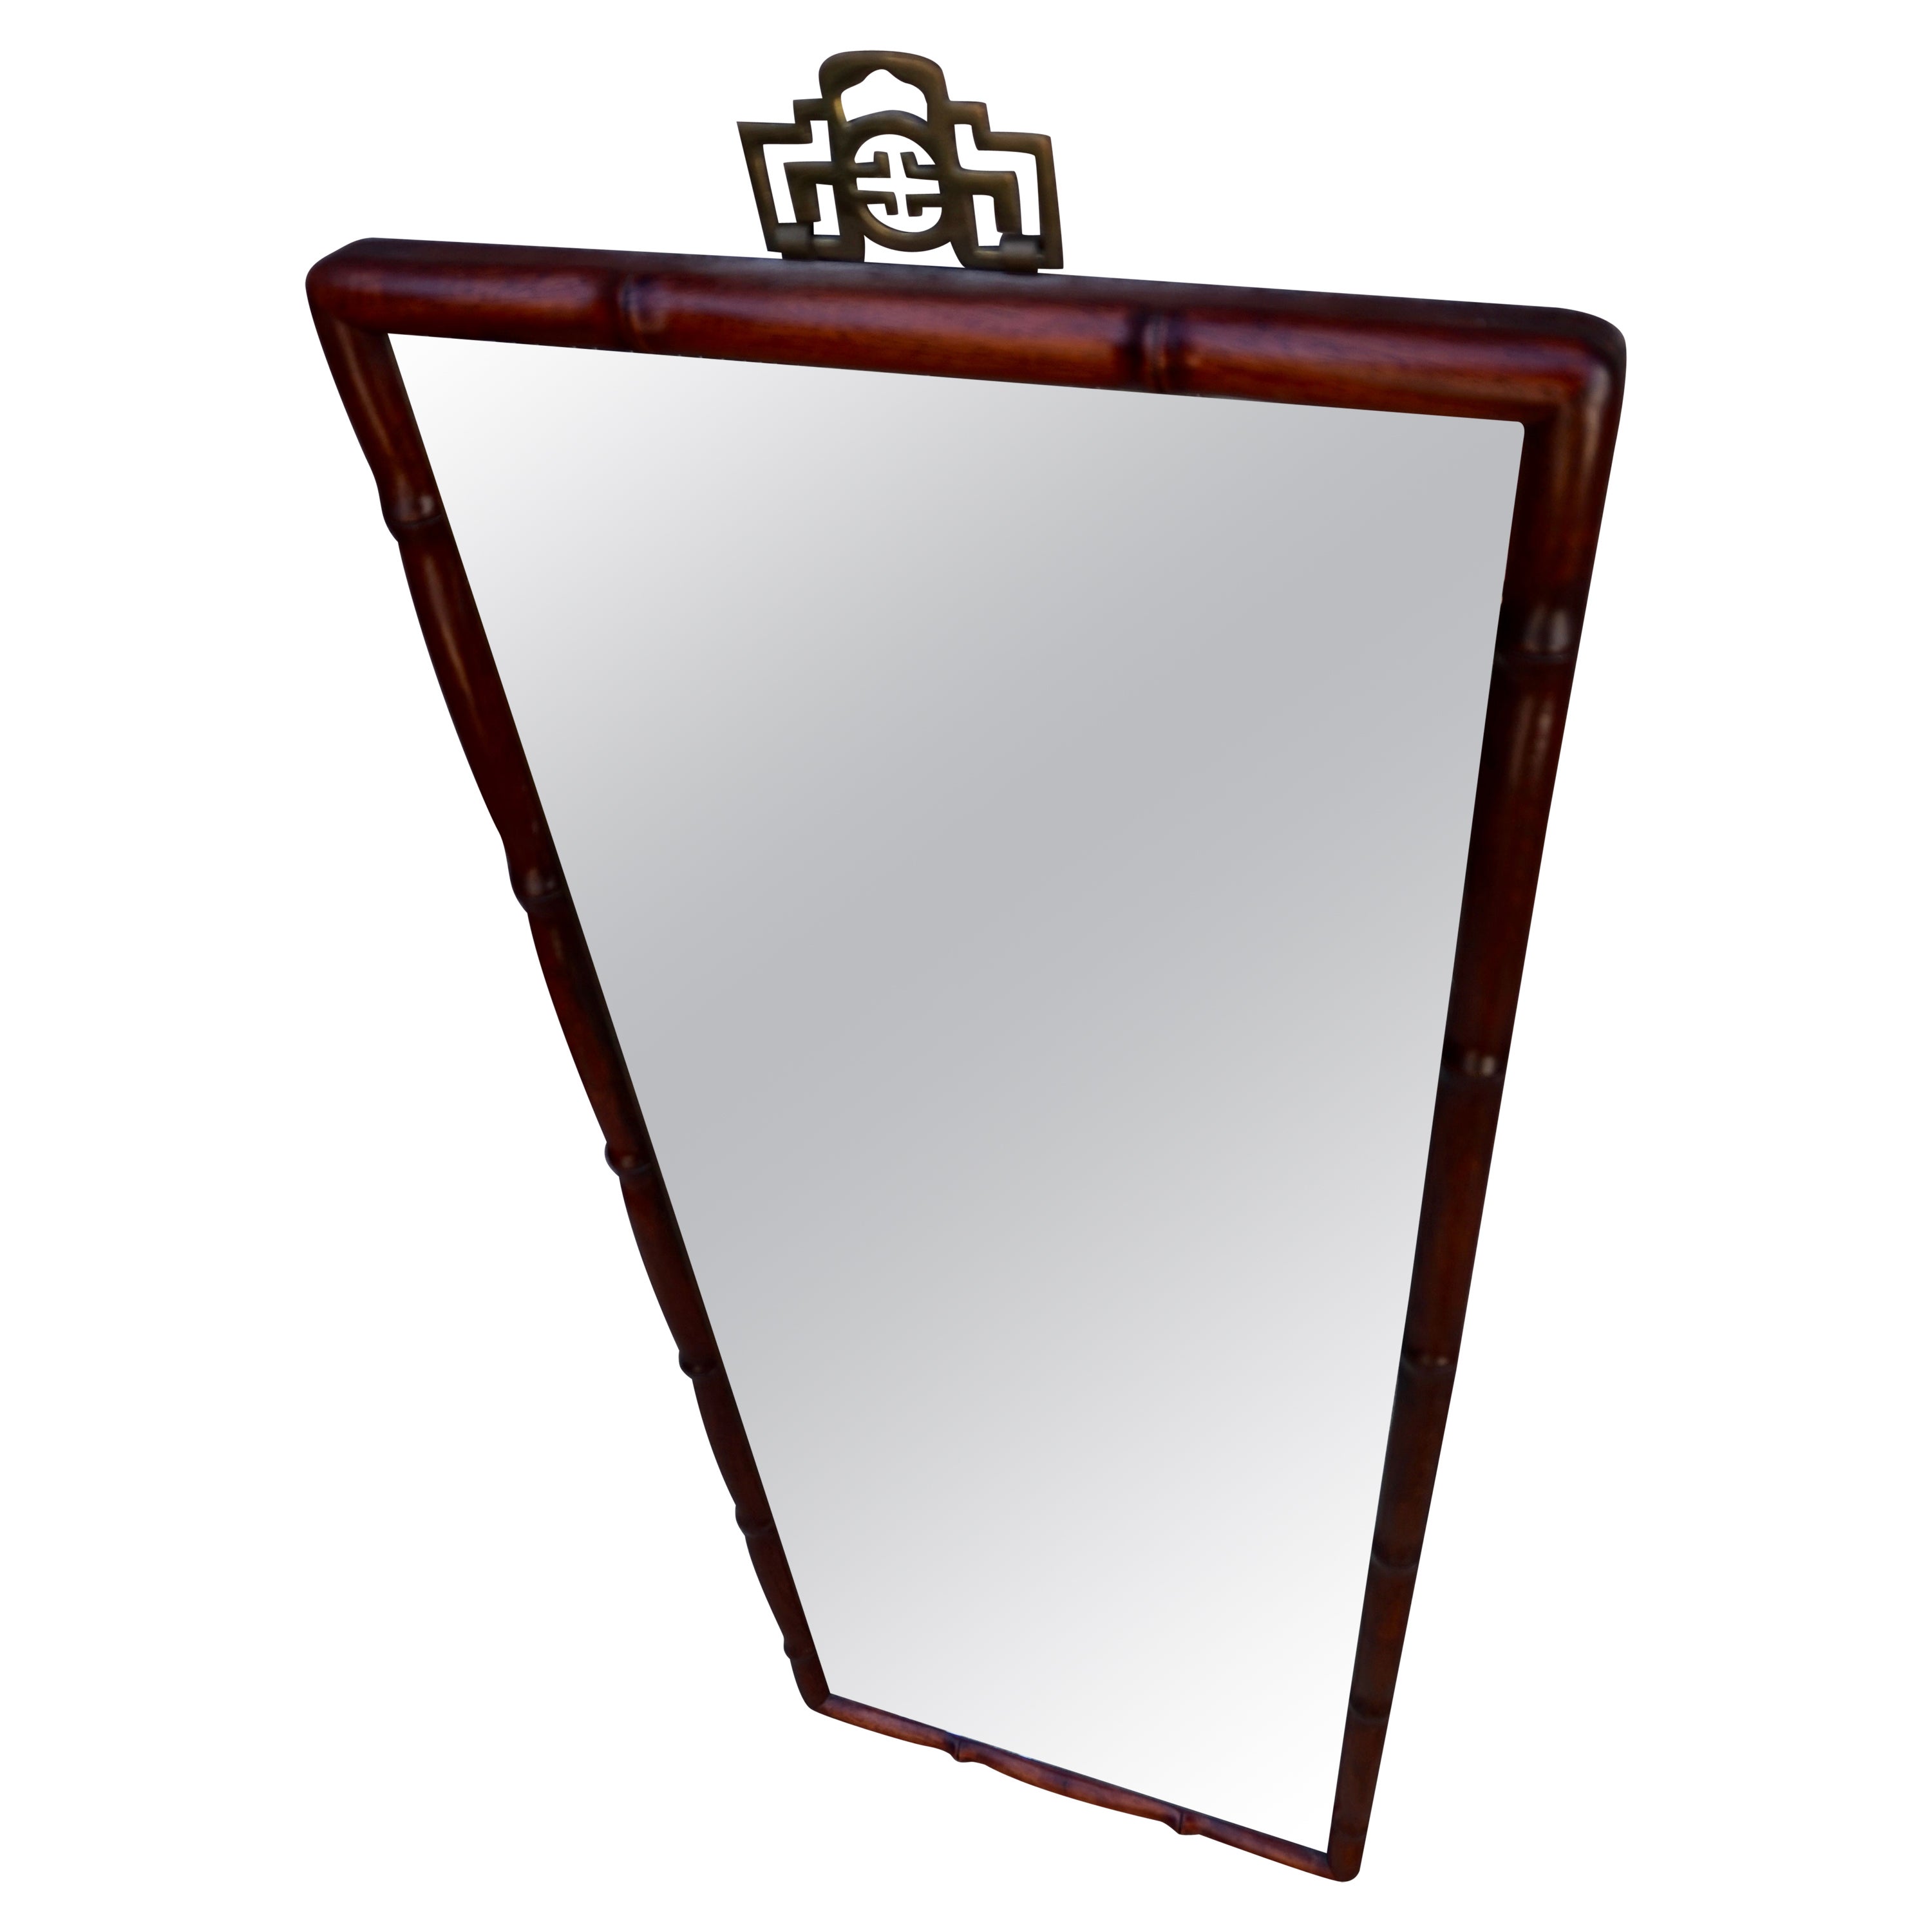 Solid Rosewood Asian Wall Mirror Carved In Bamboo Motif With Brass Hardware